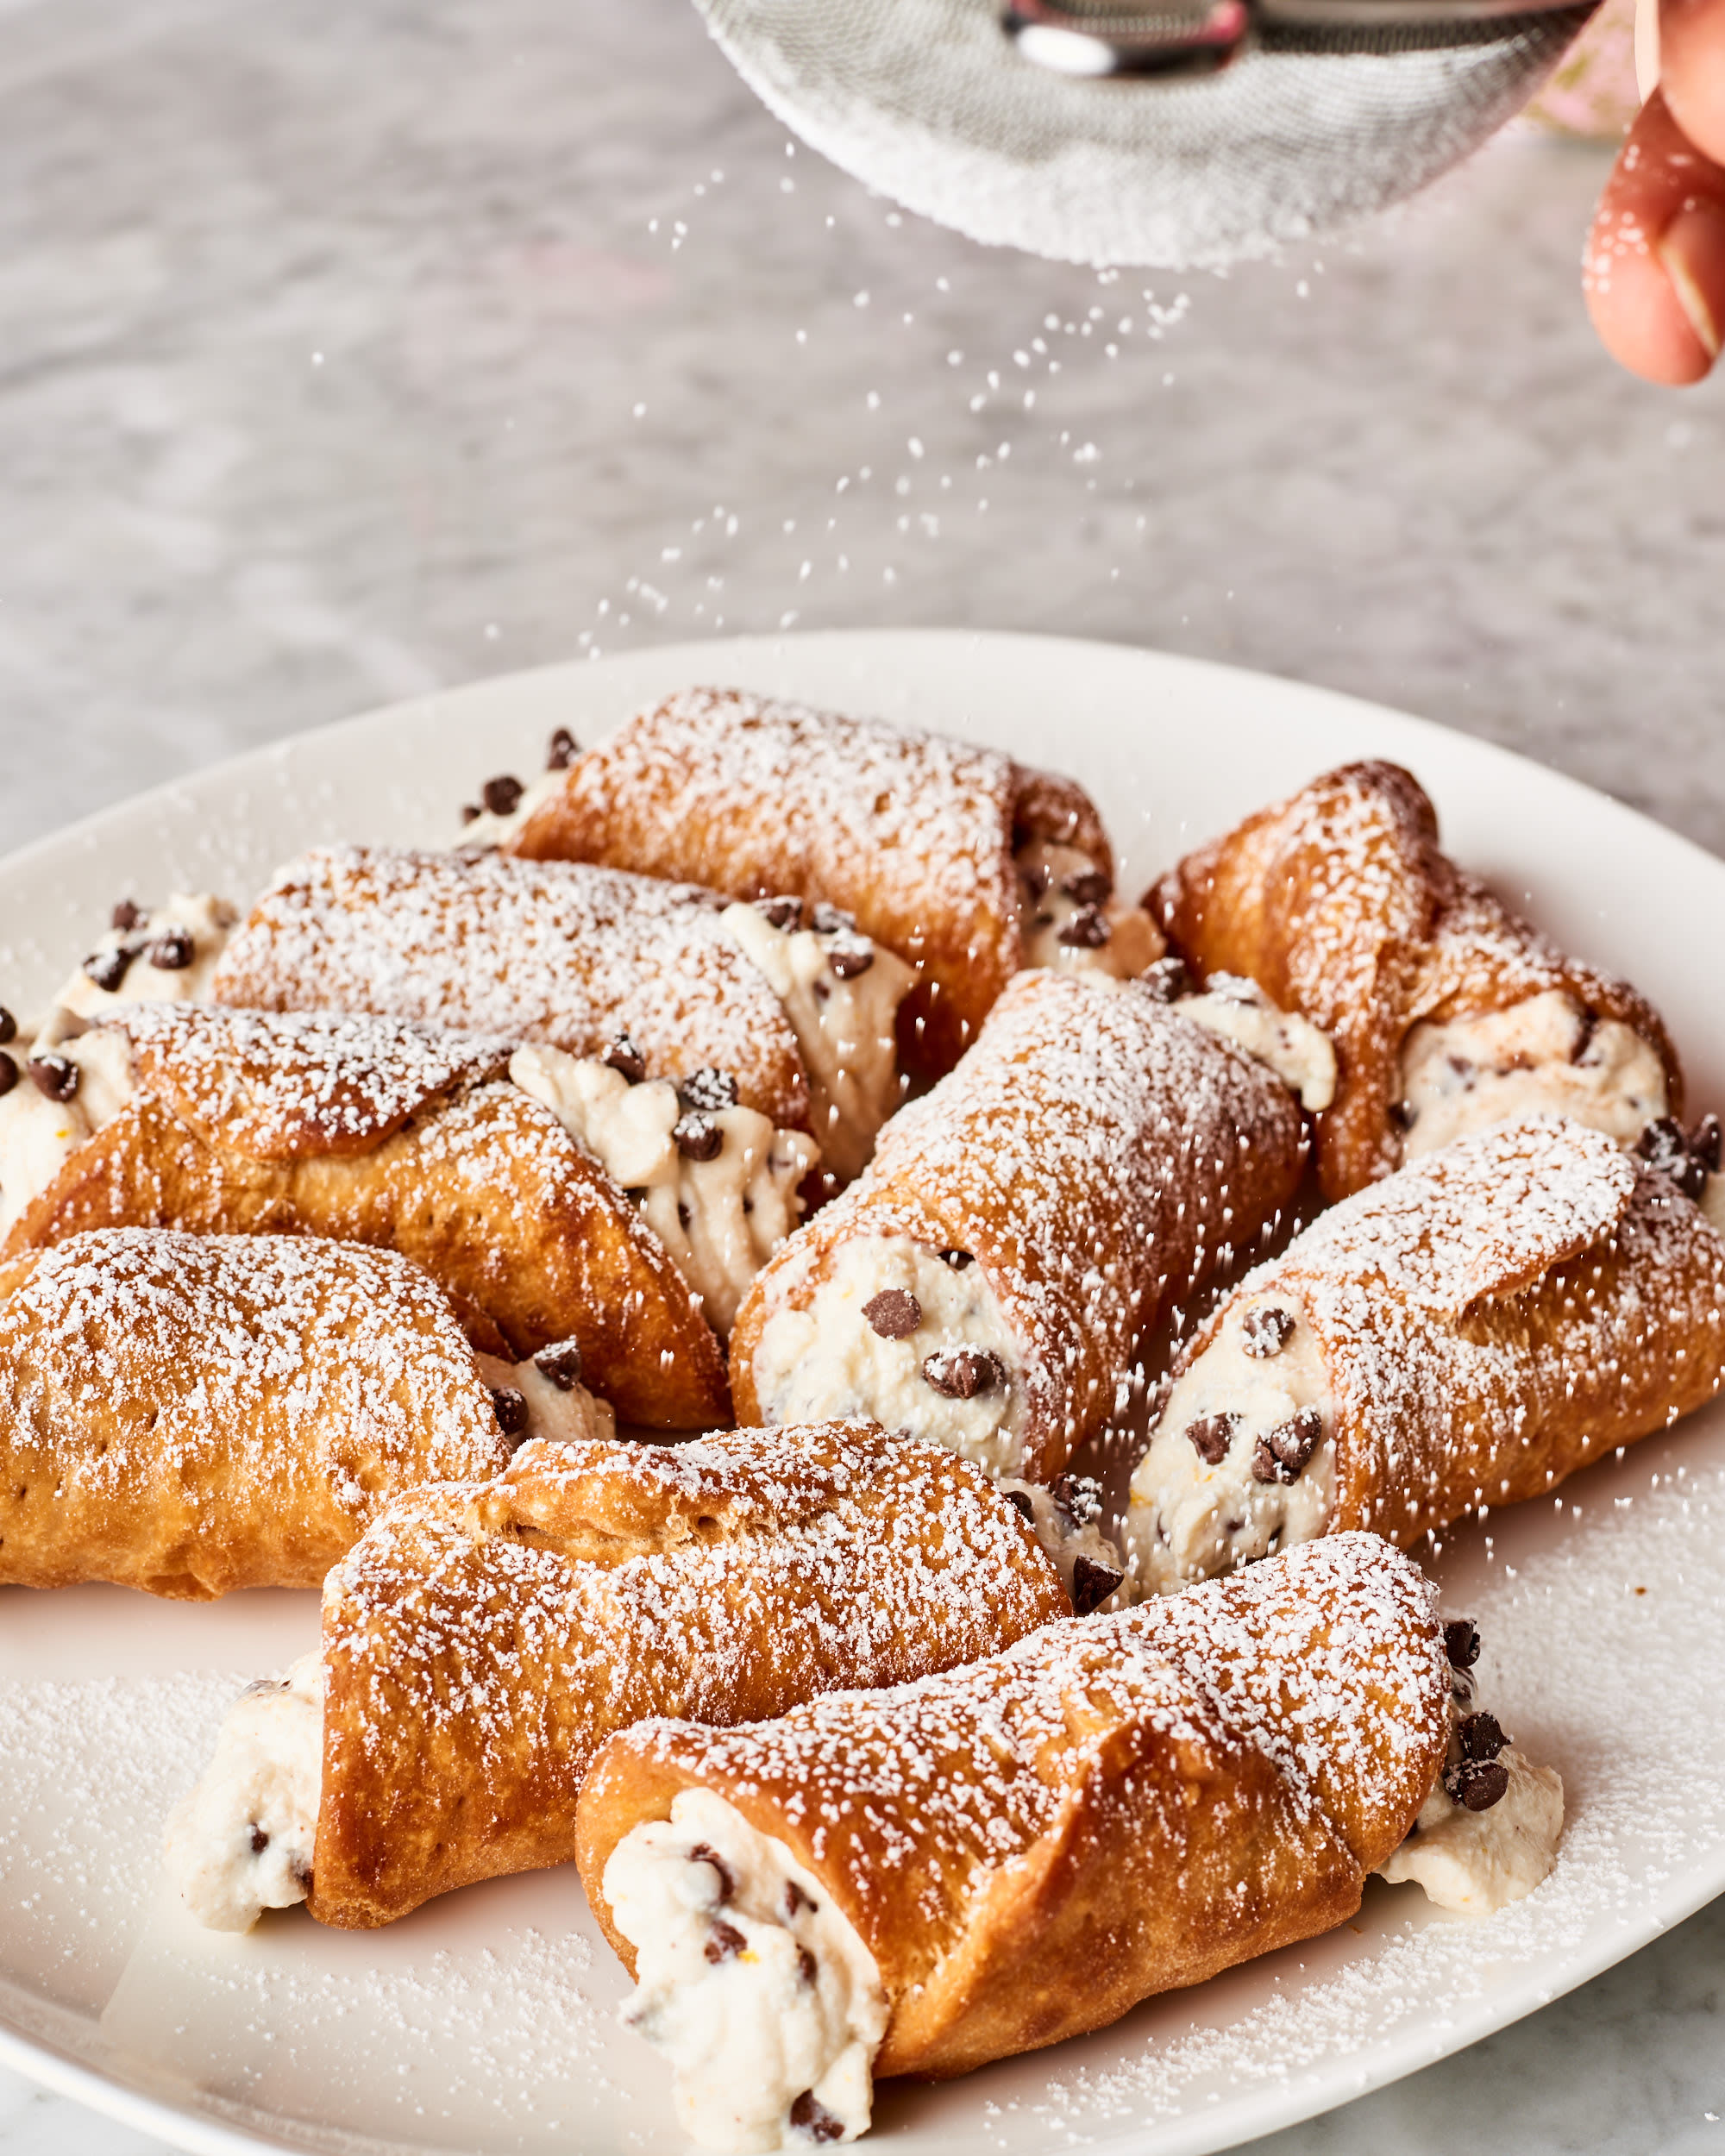 How to make delicious cannoli with authentic DIY wood cannoli rollers.